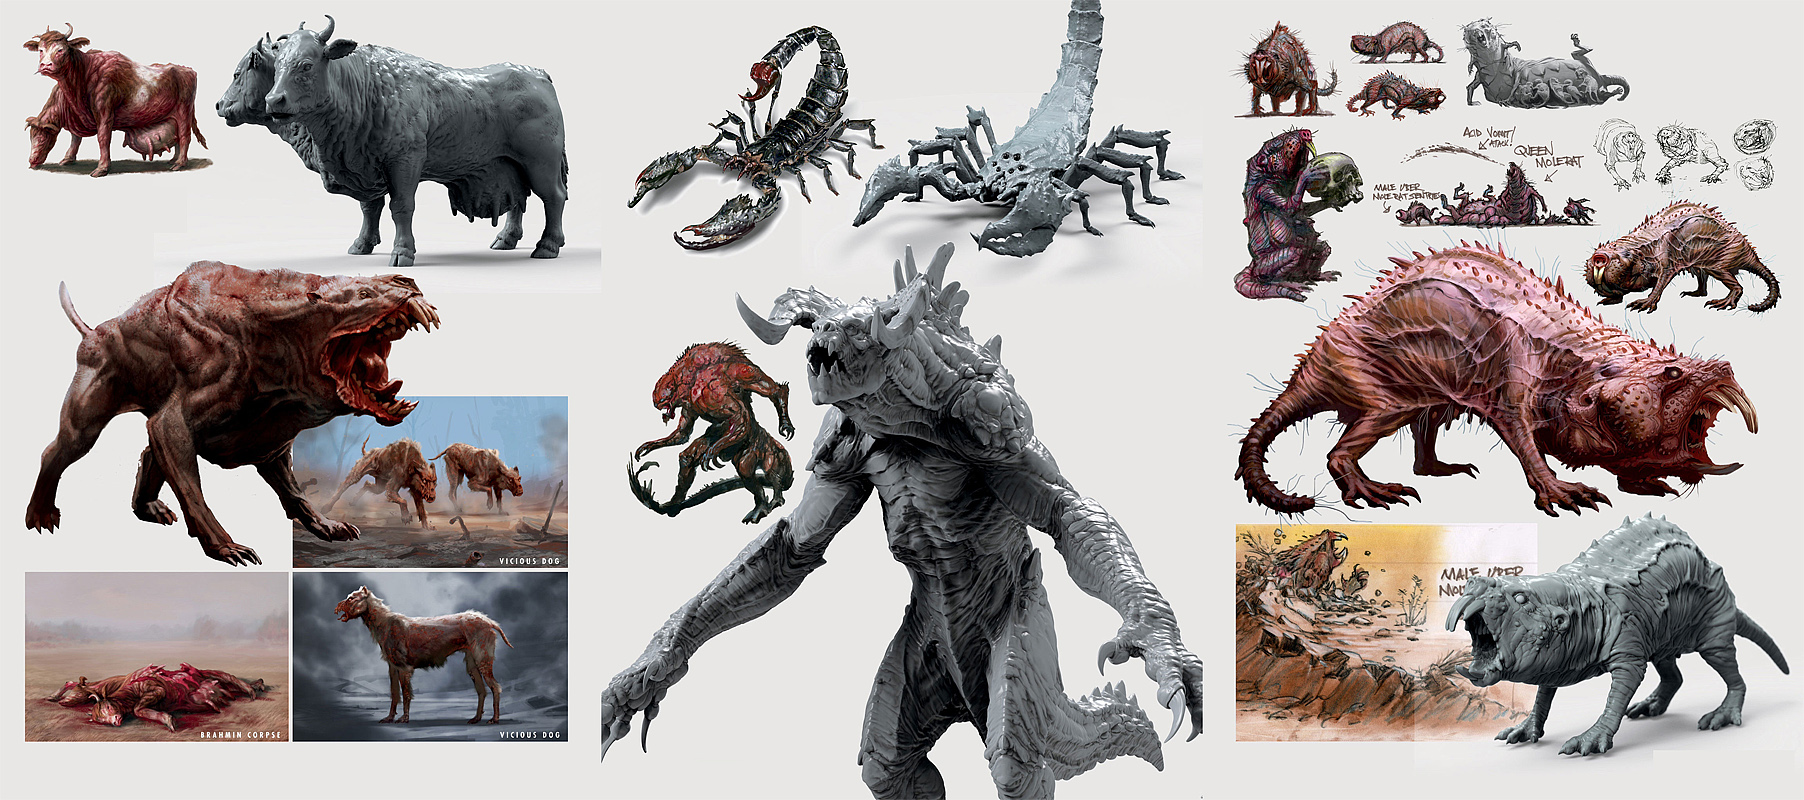 Fallout 4 creatures | Fallout Wiki | FANDOM powered by Wikia